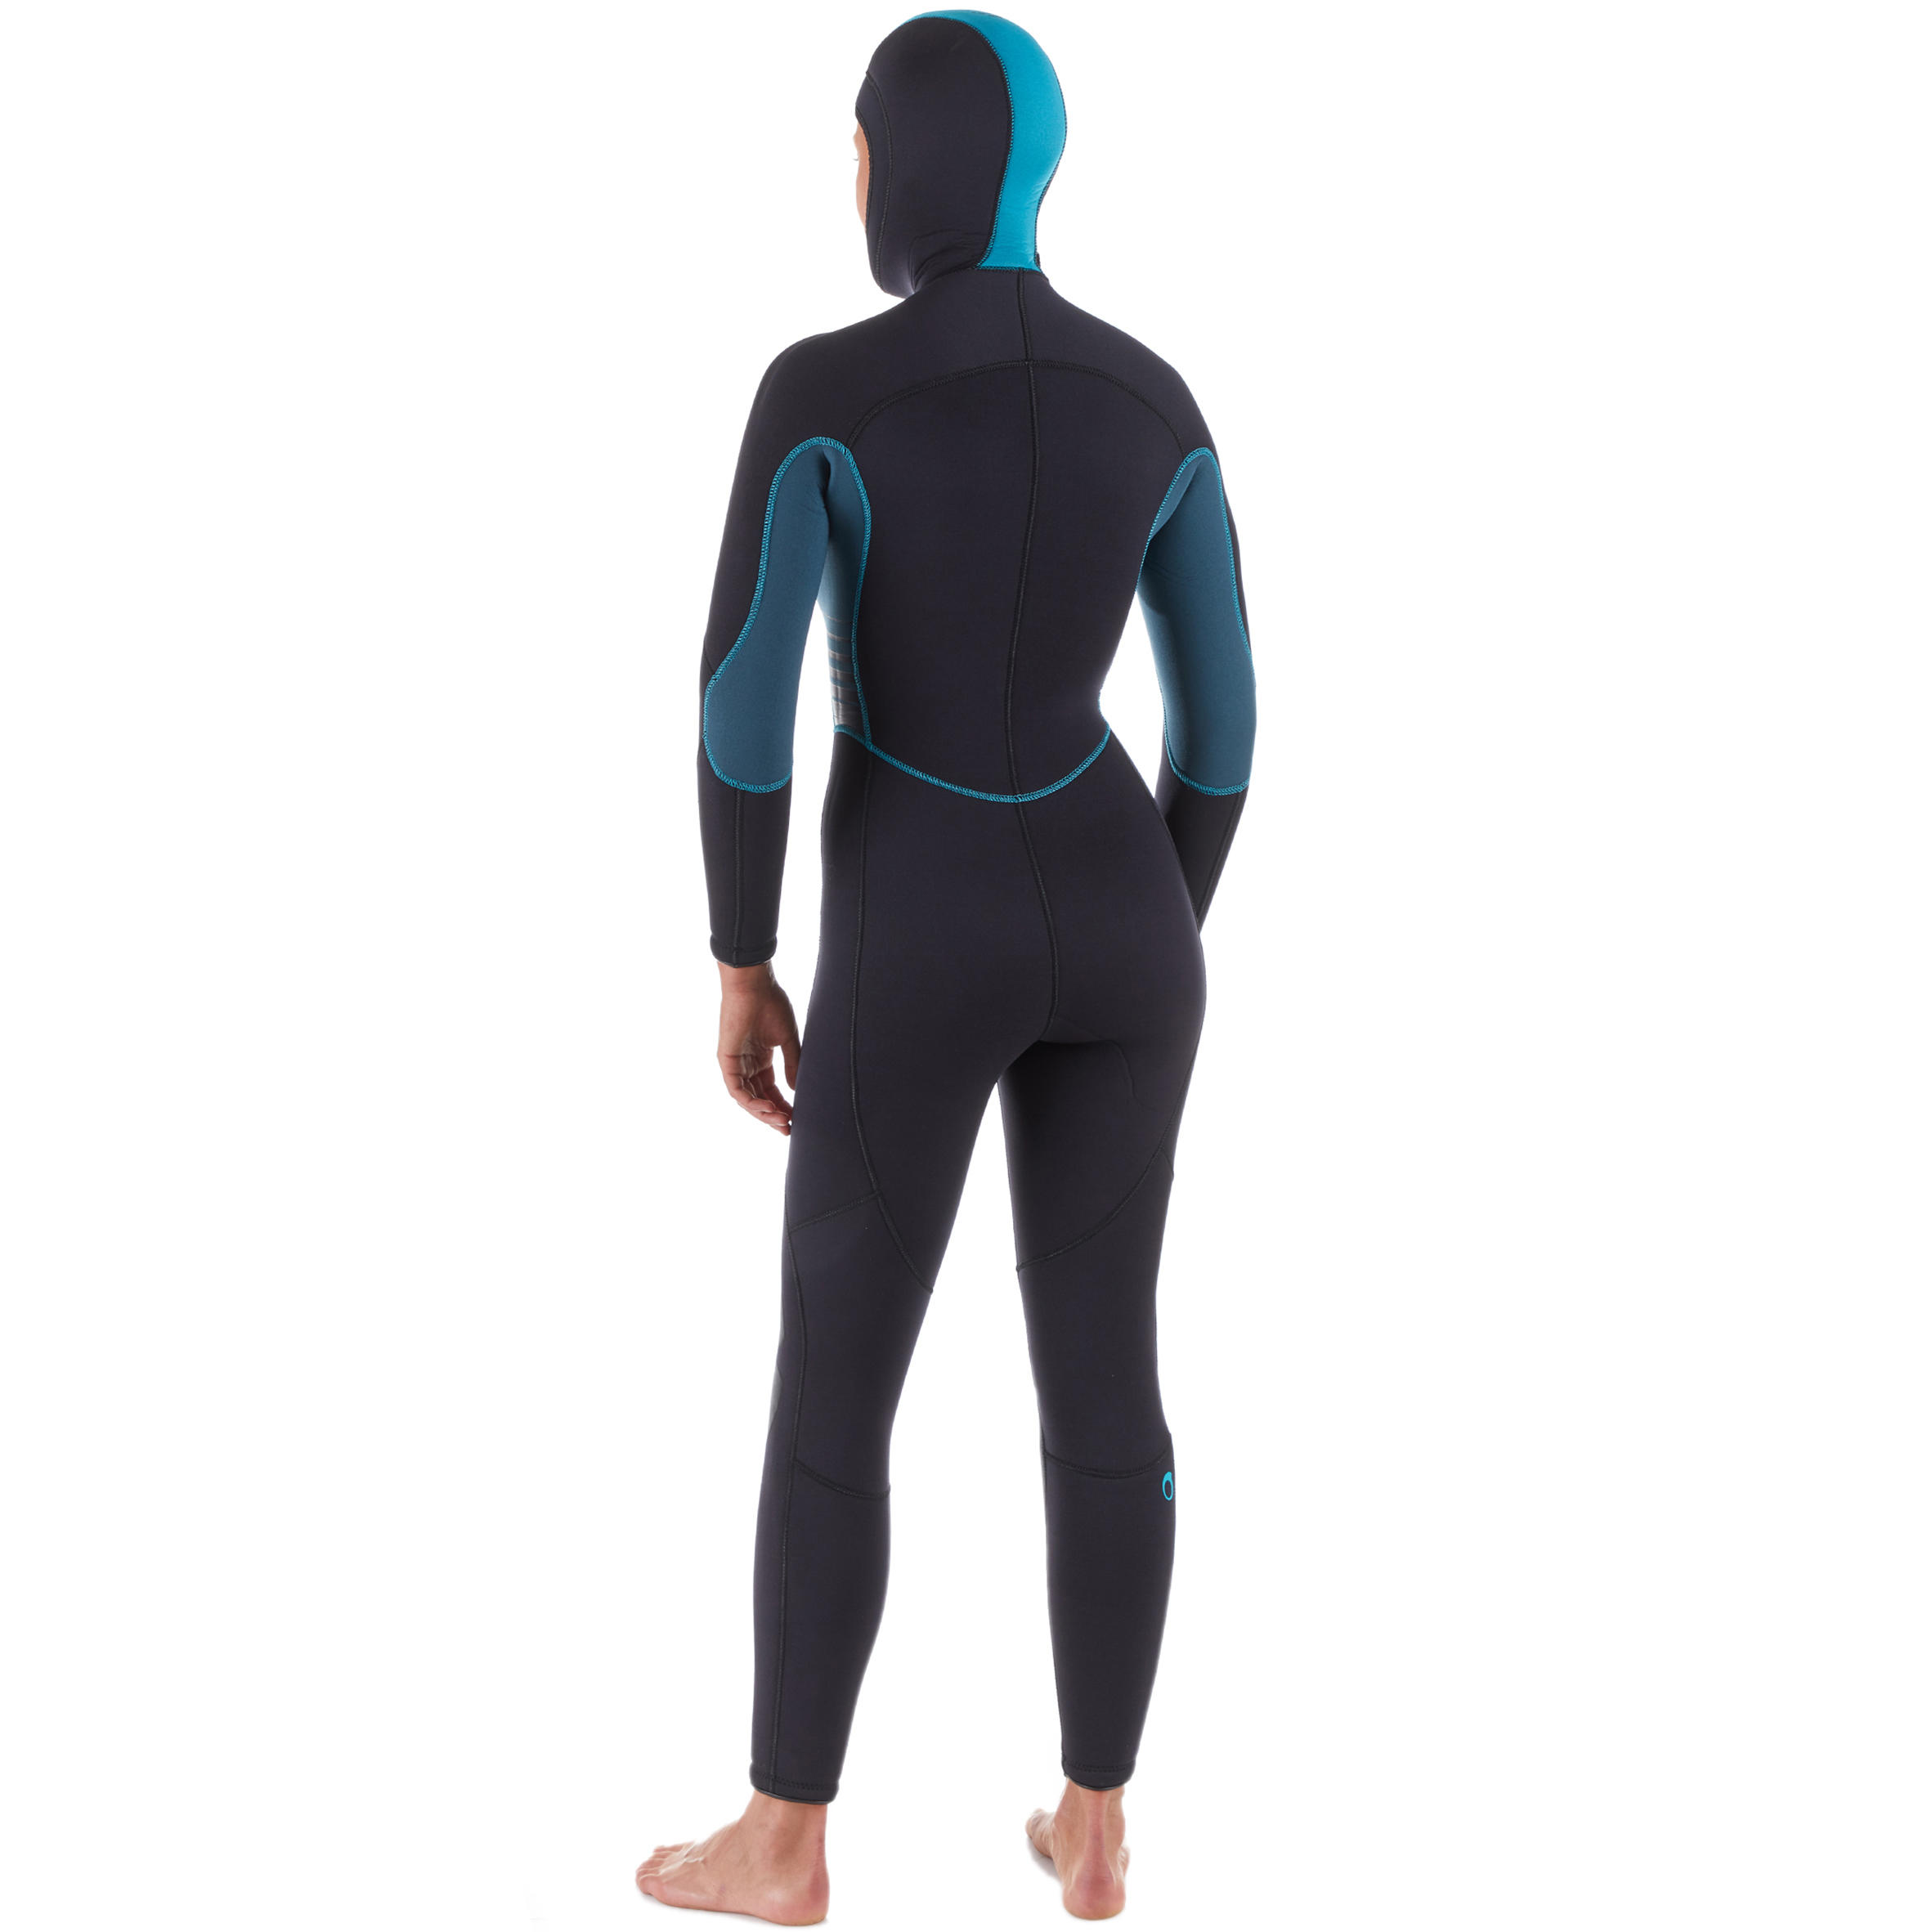 Women's diving wetsuit with hood 7.5 mm neoprene - SCD 500 black and blue 2/6